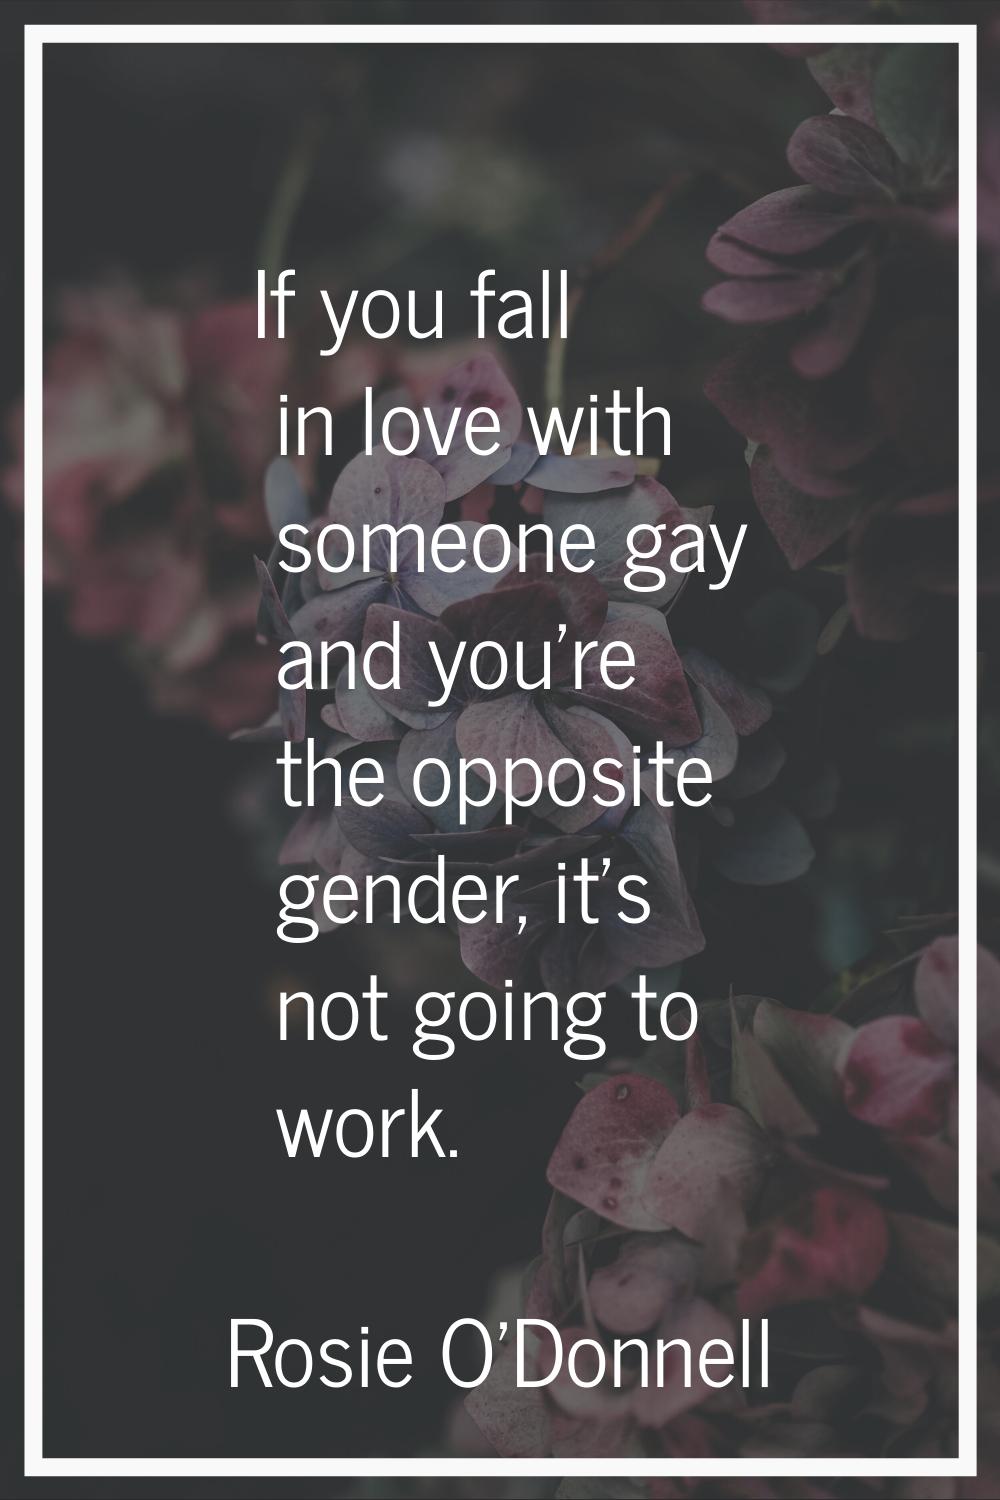 If you fall in love with someone gay and you're the opposite gender, it's not going to work.